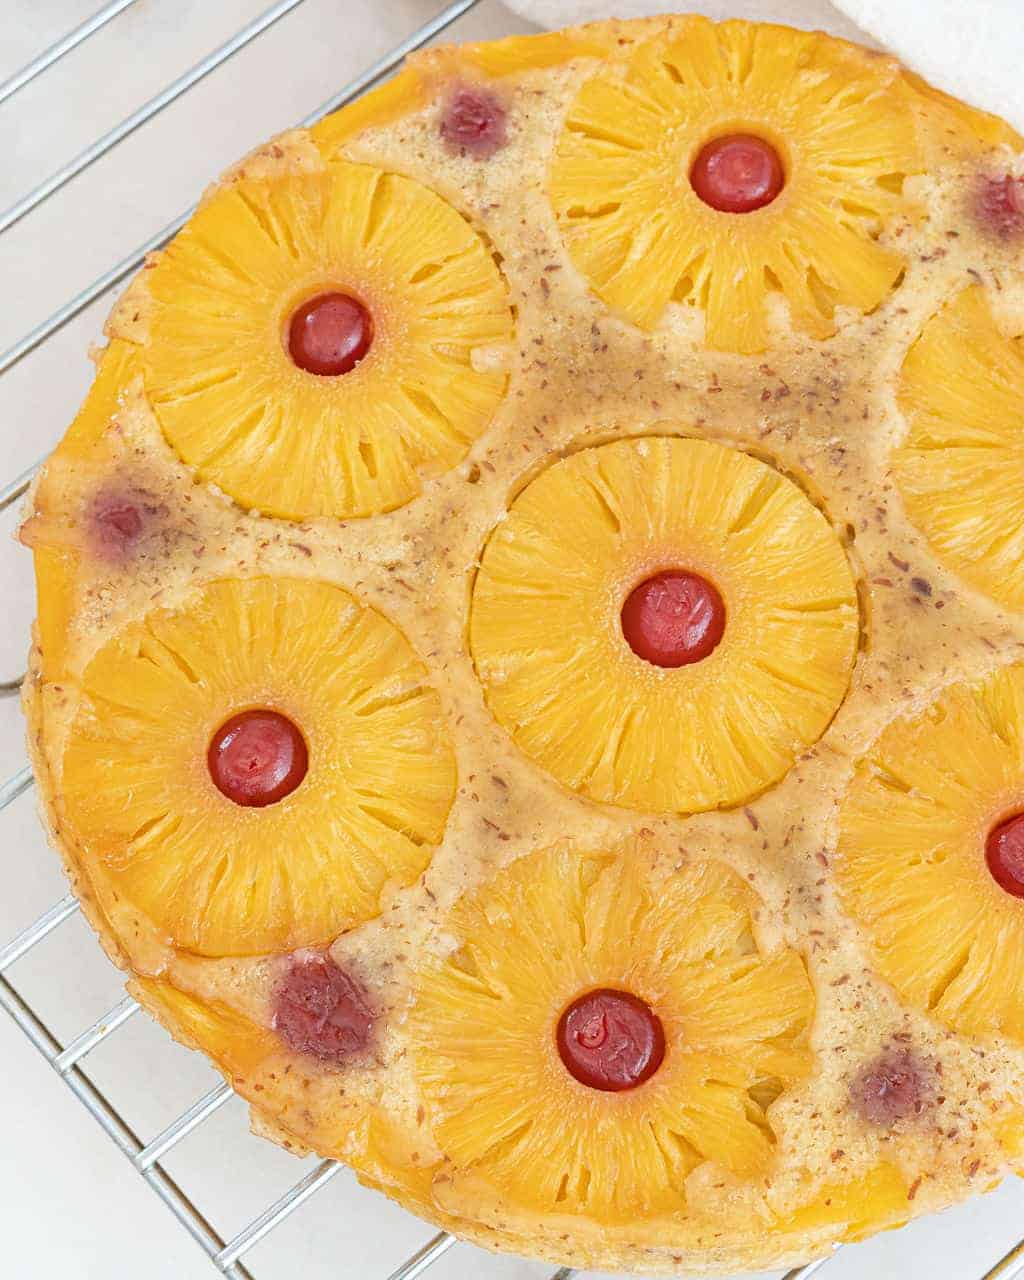 completed Vegan Pineapple Upside Down Cake against a white surface